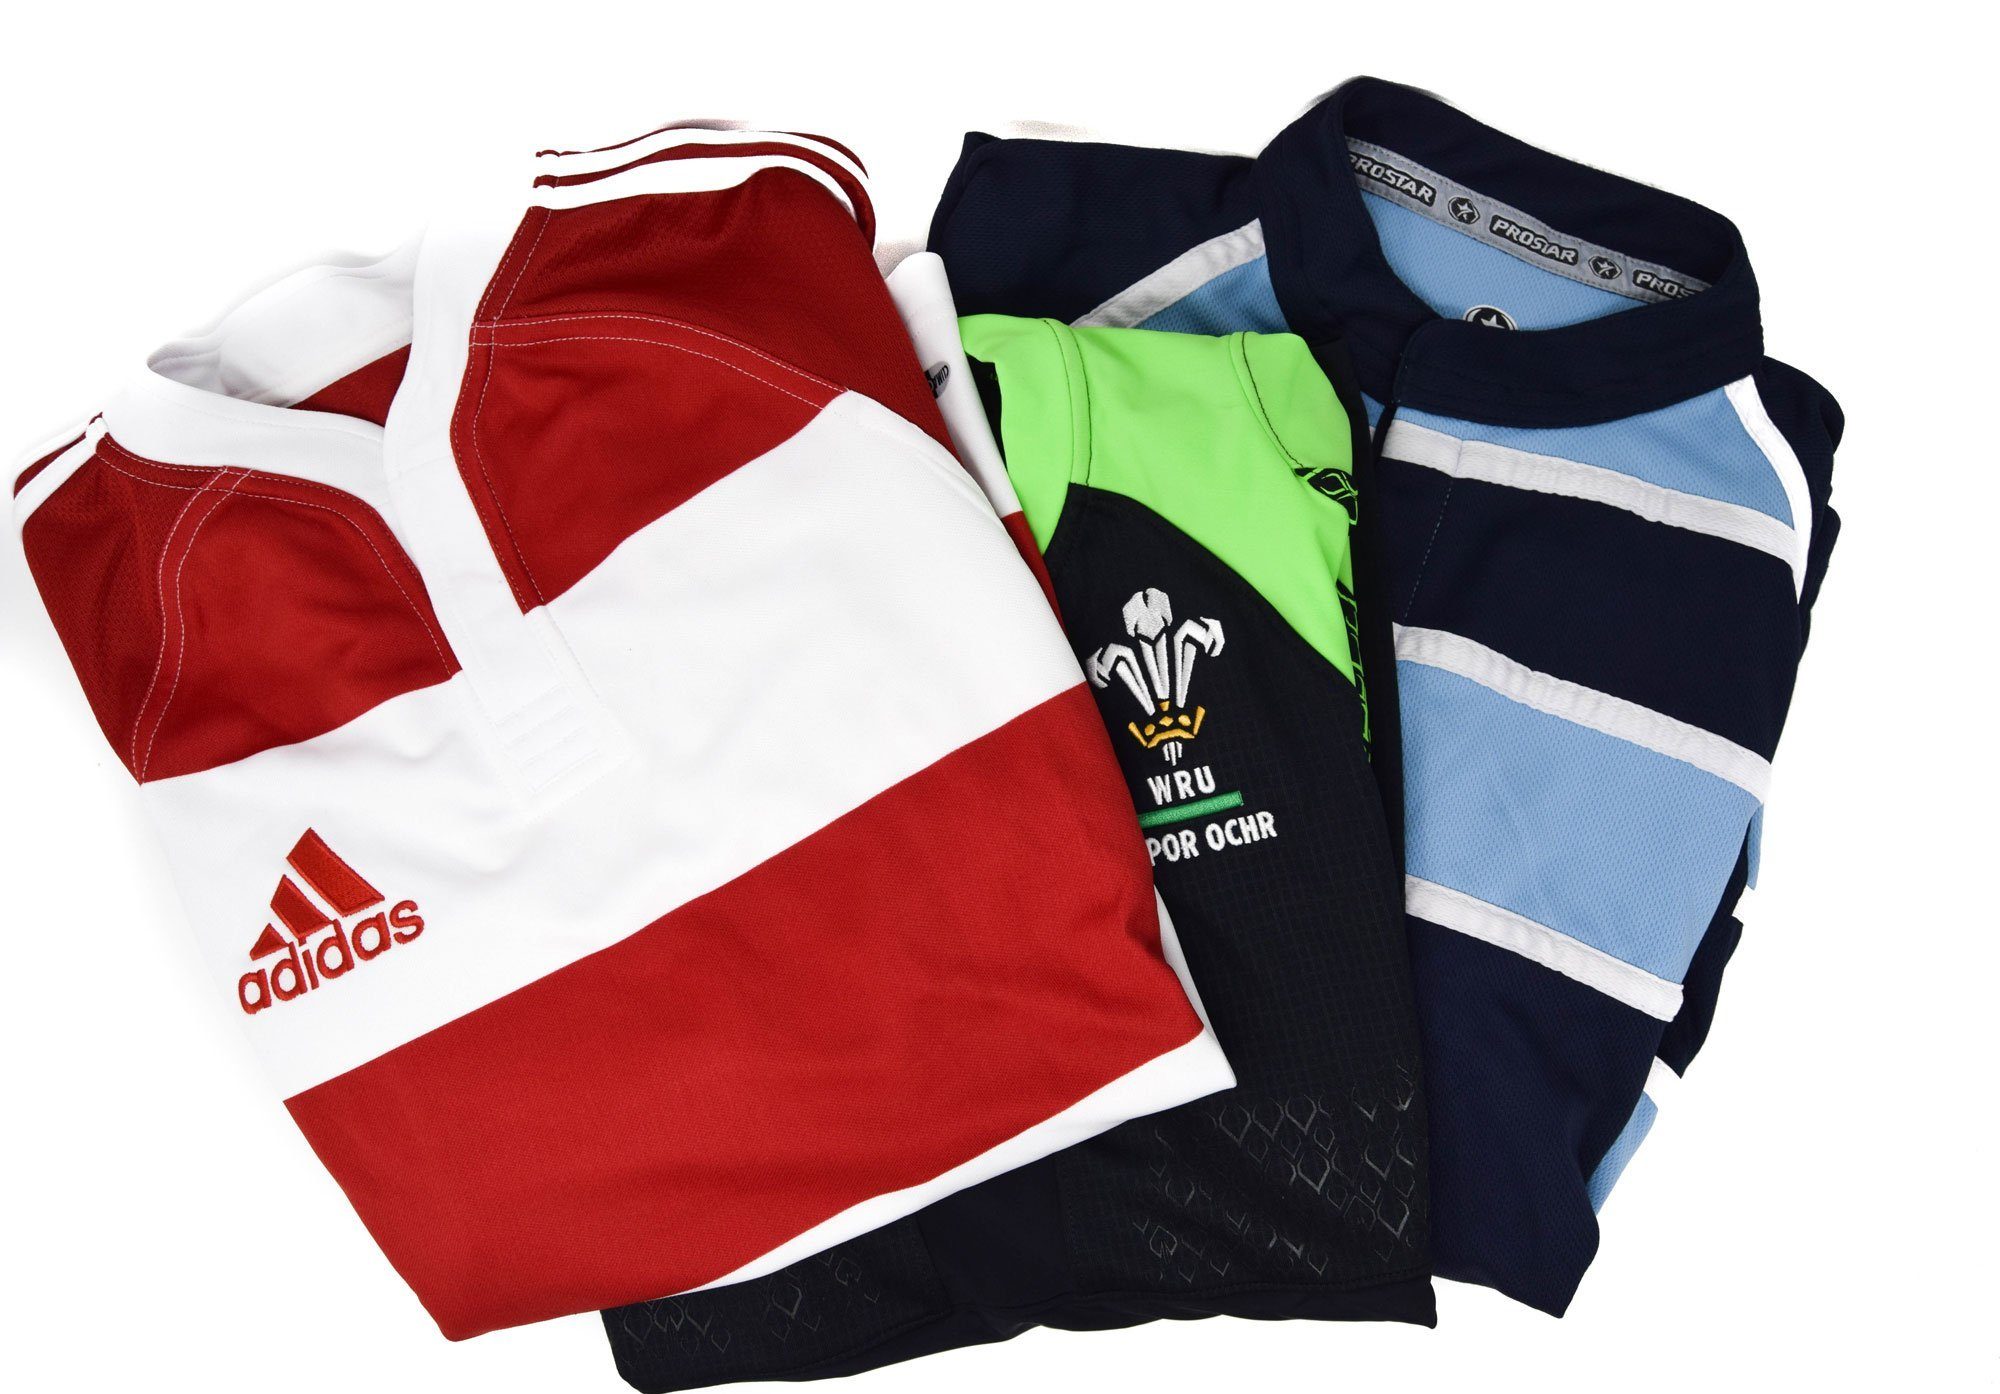 Match Apparel,Youth - Practice Jerseys Grab Bag - Youth & Adult